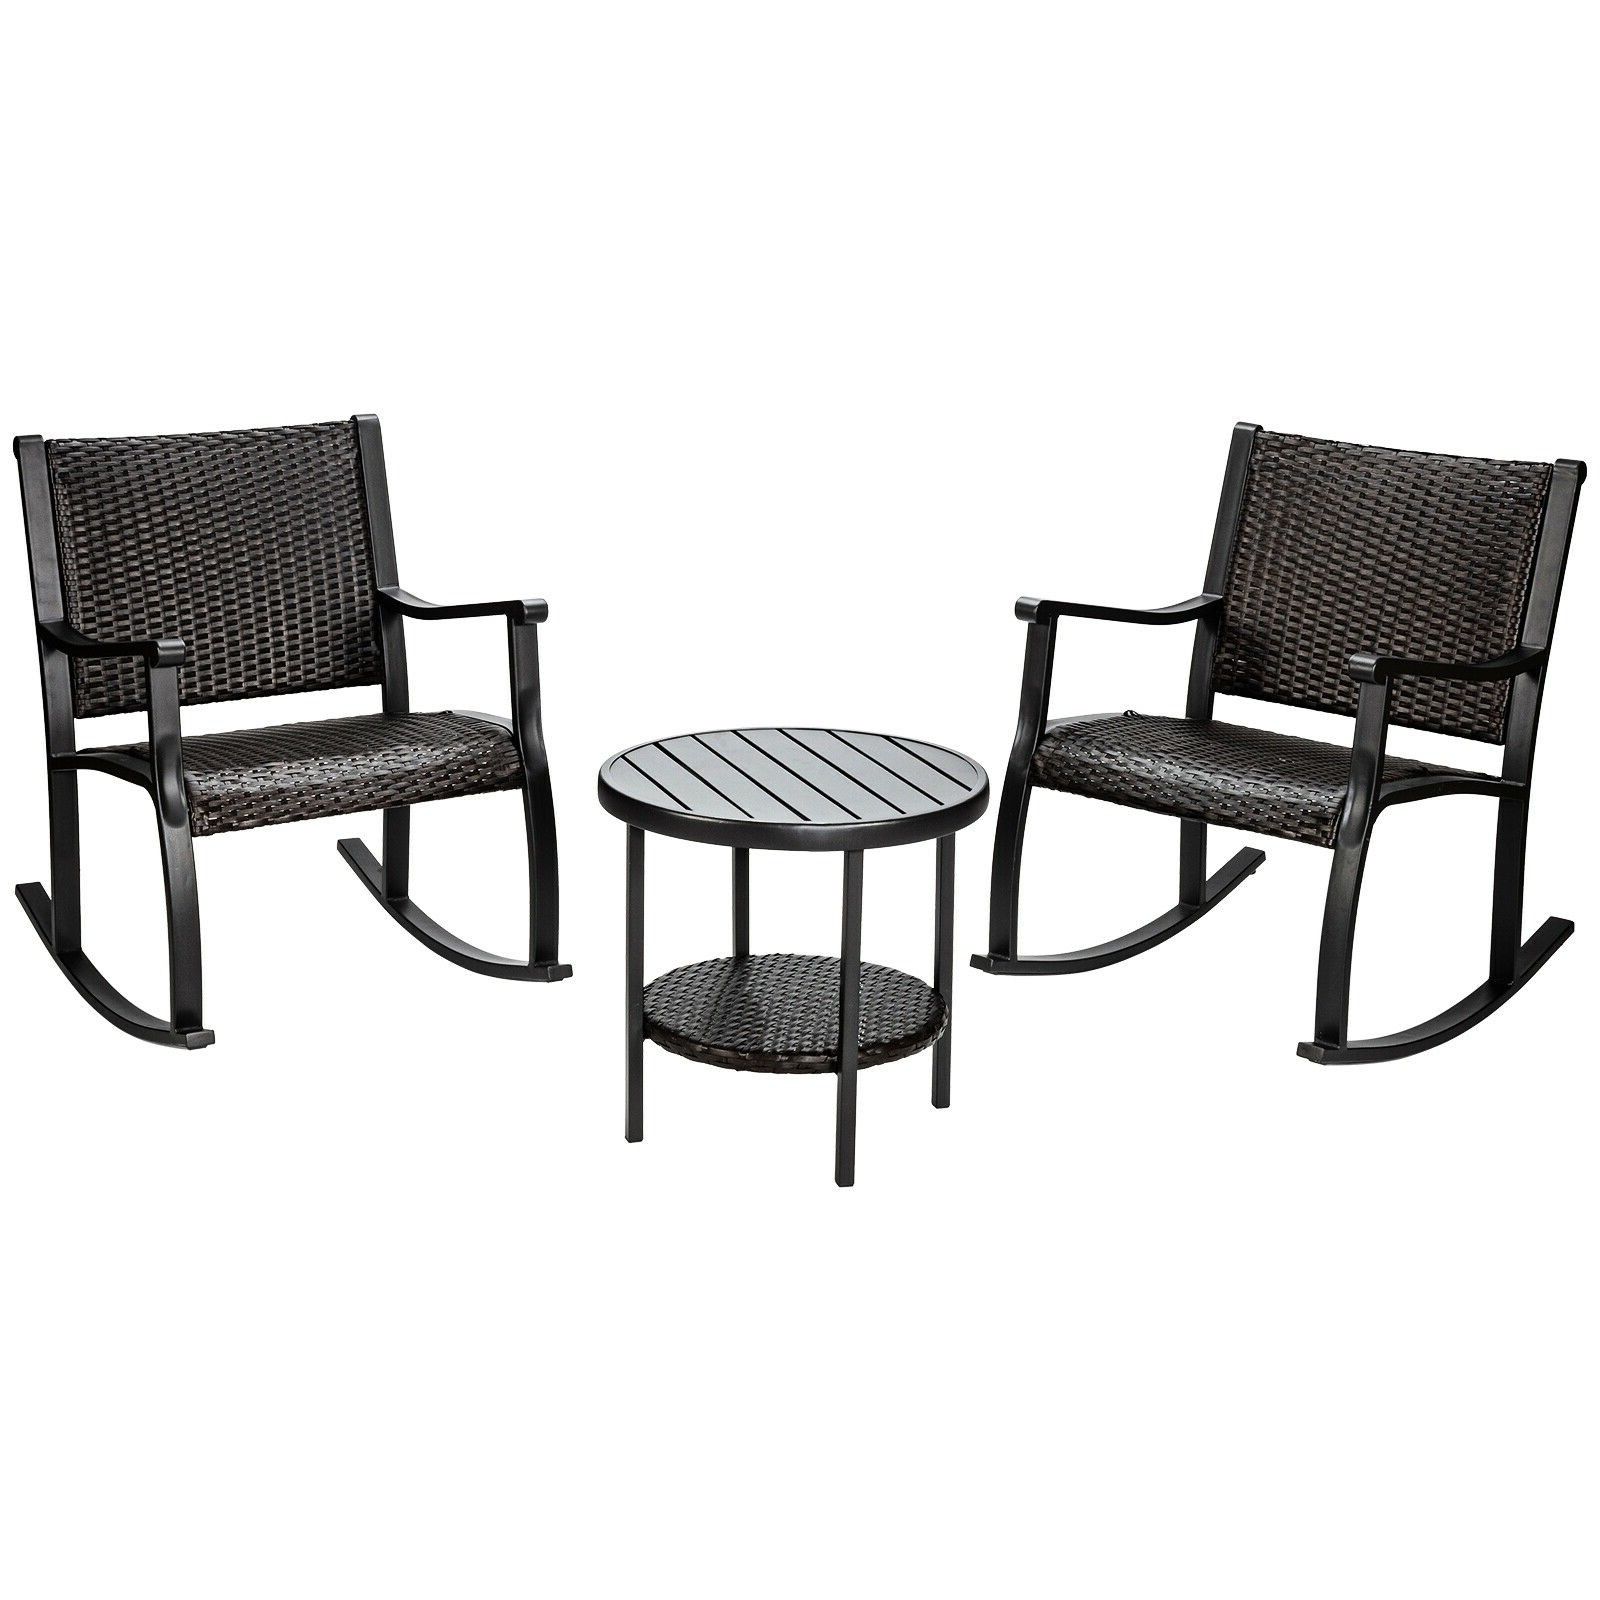 3 Pcs Patio Rattan Furniture Set With Coffee Table And Rocking Chairs Throughout Best And Newest Outdoor Rocking Chair Sets With Coffee Table (View 3 of 15)